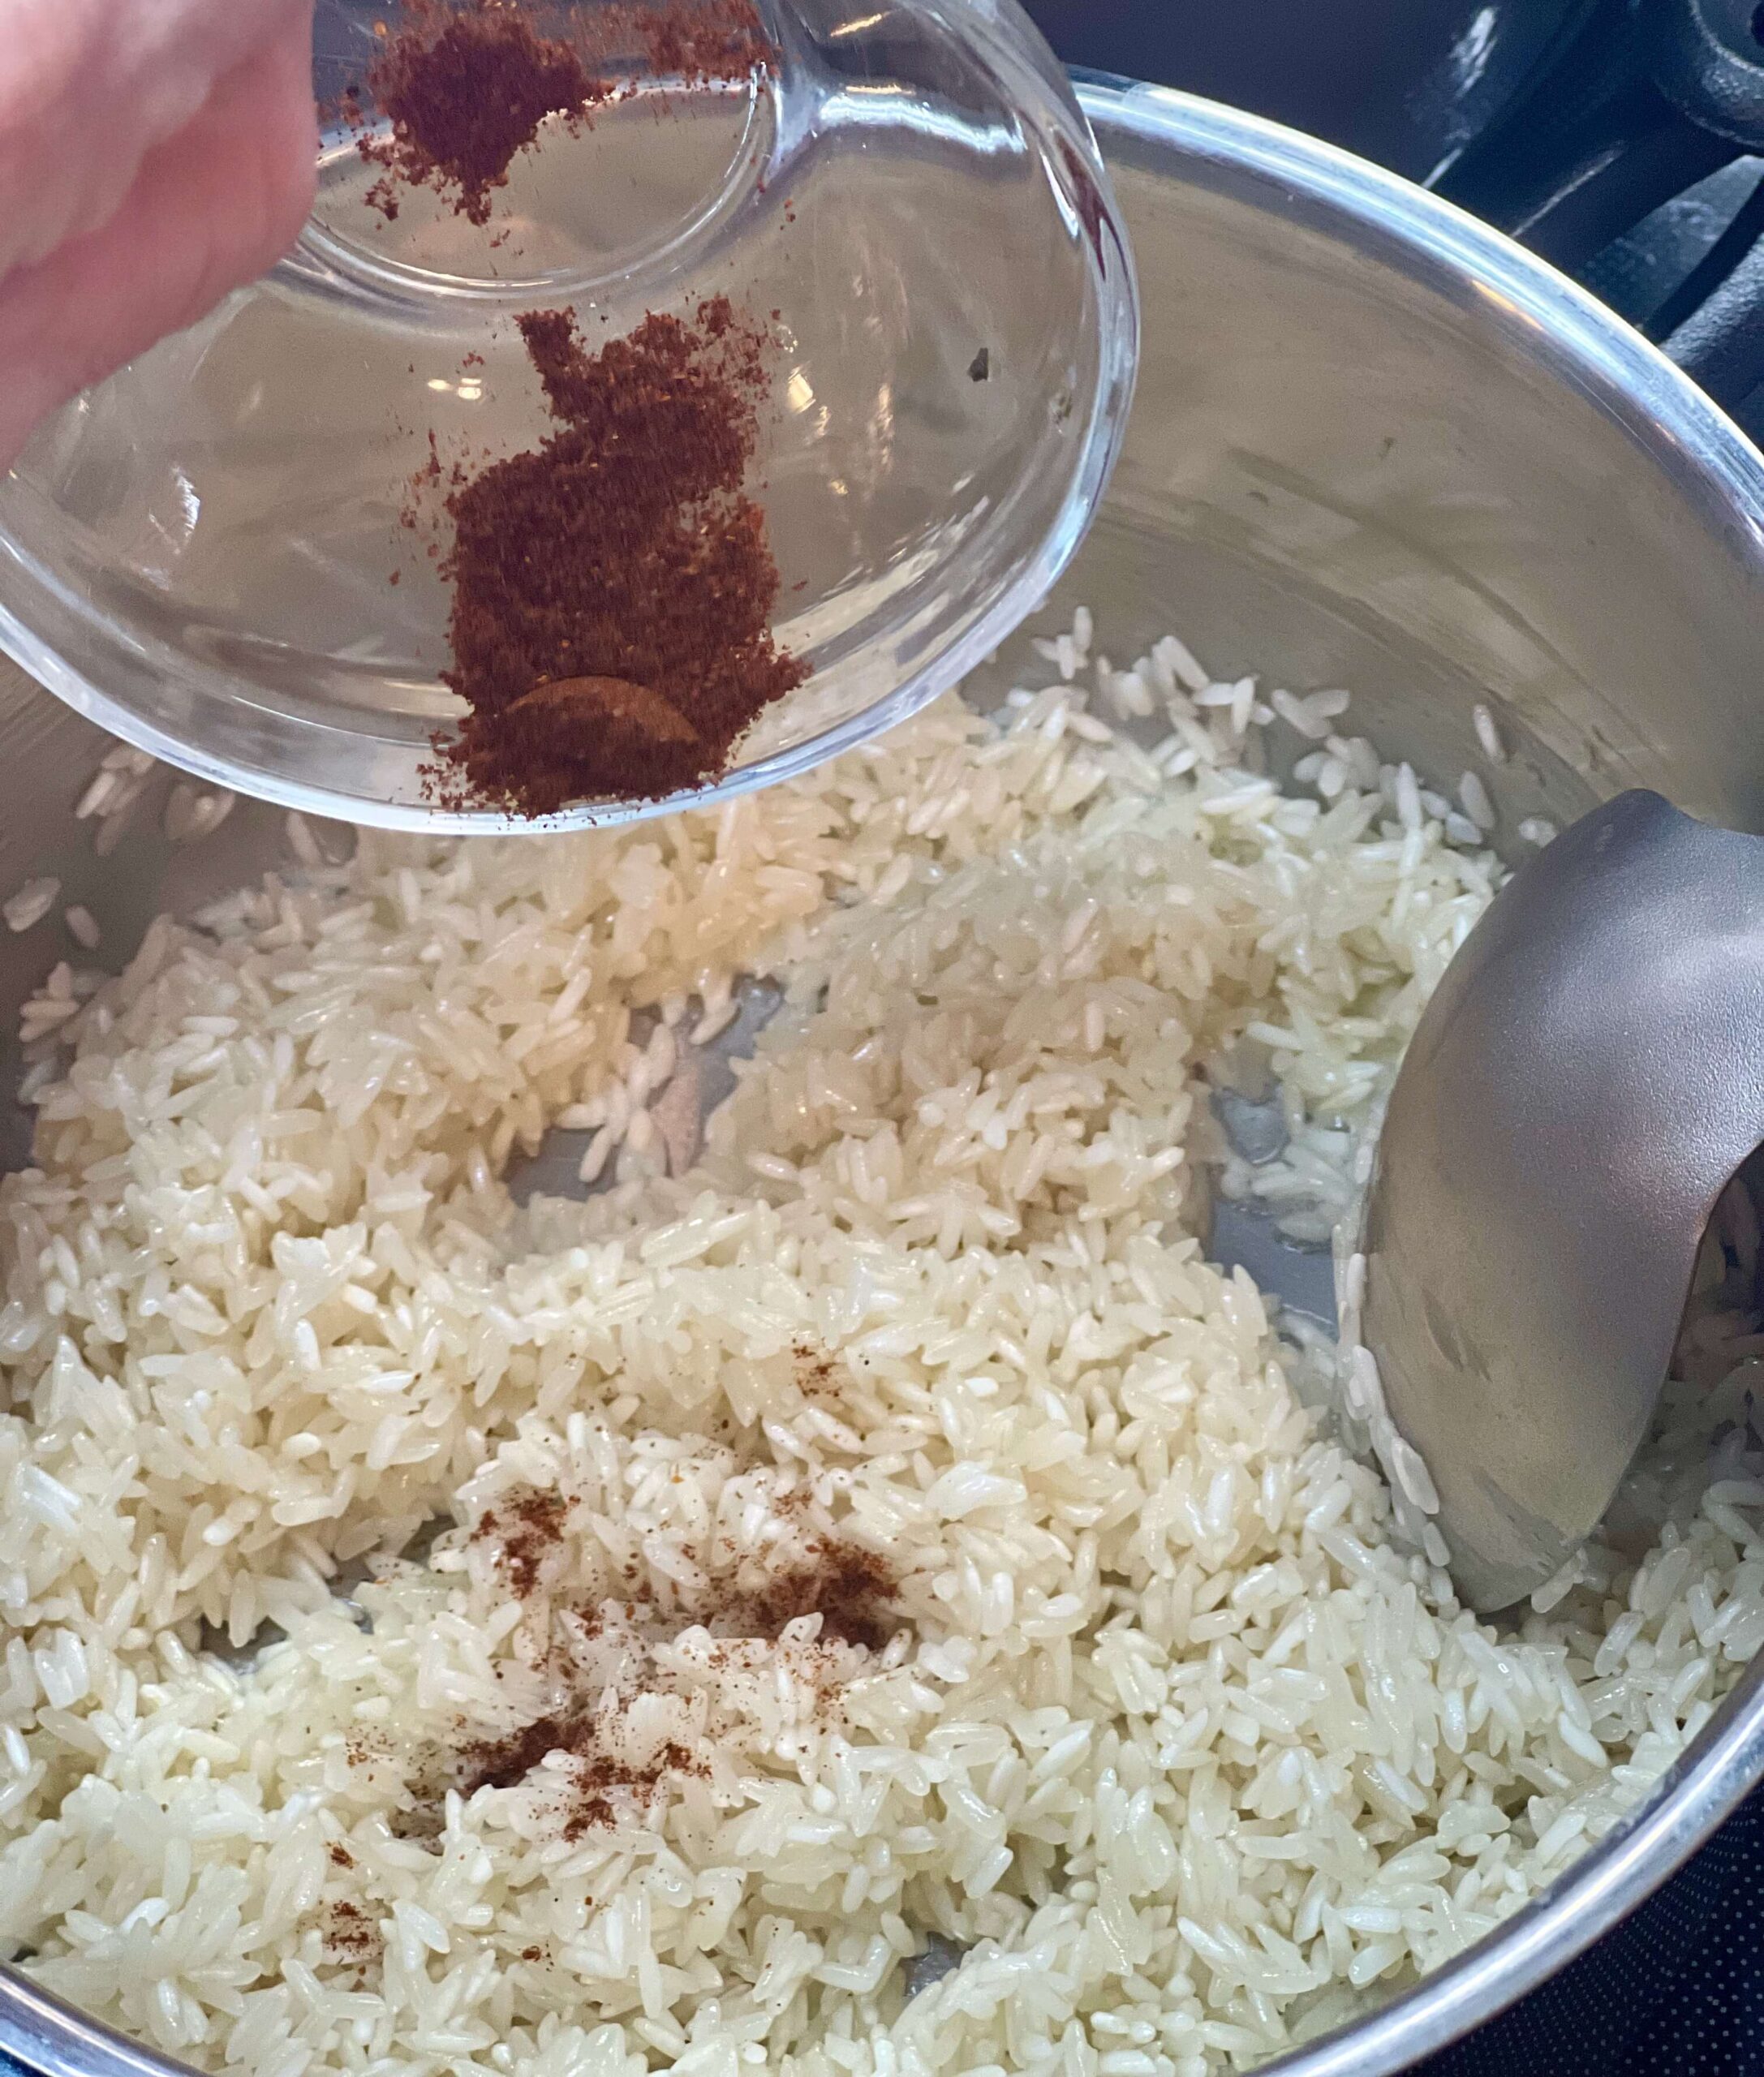 Begin adding your spices for your Southwest rice